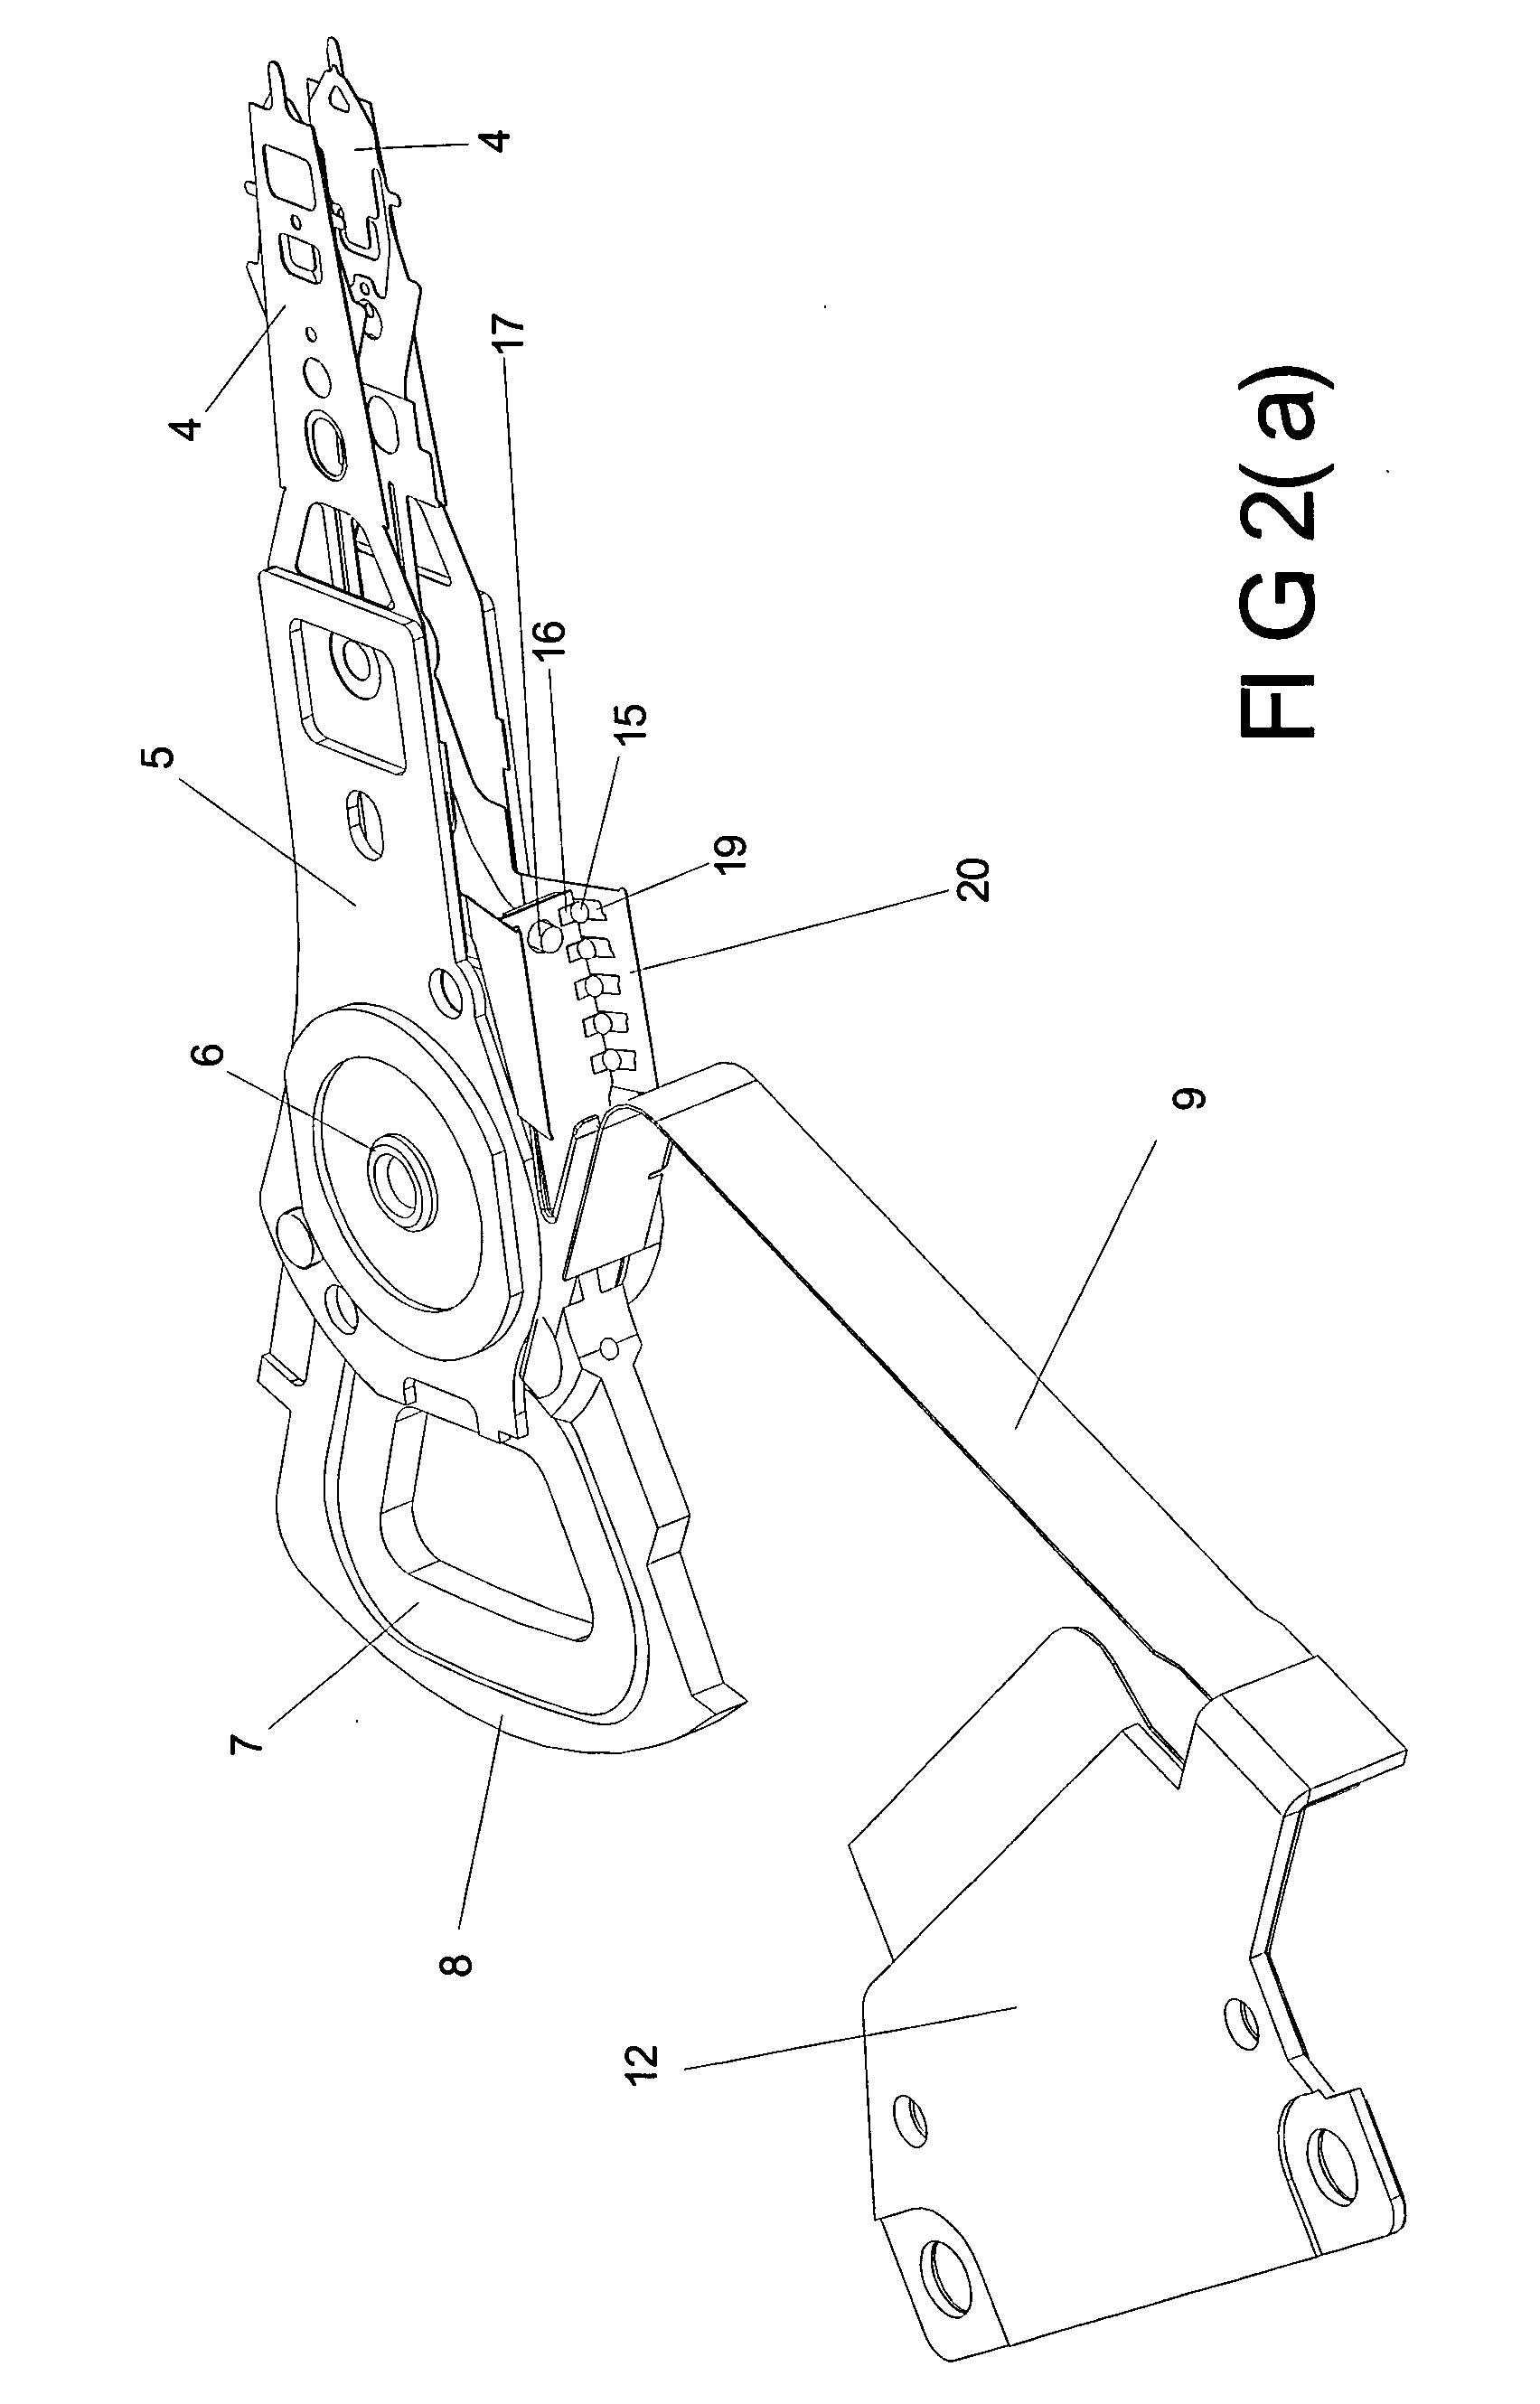 Head stack assembly and manufacturing thereof